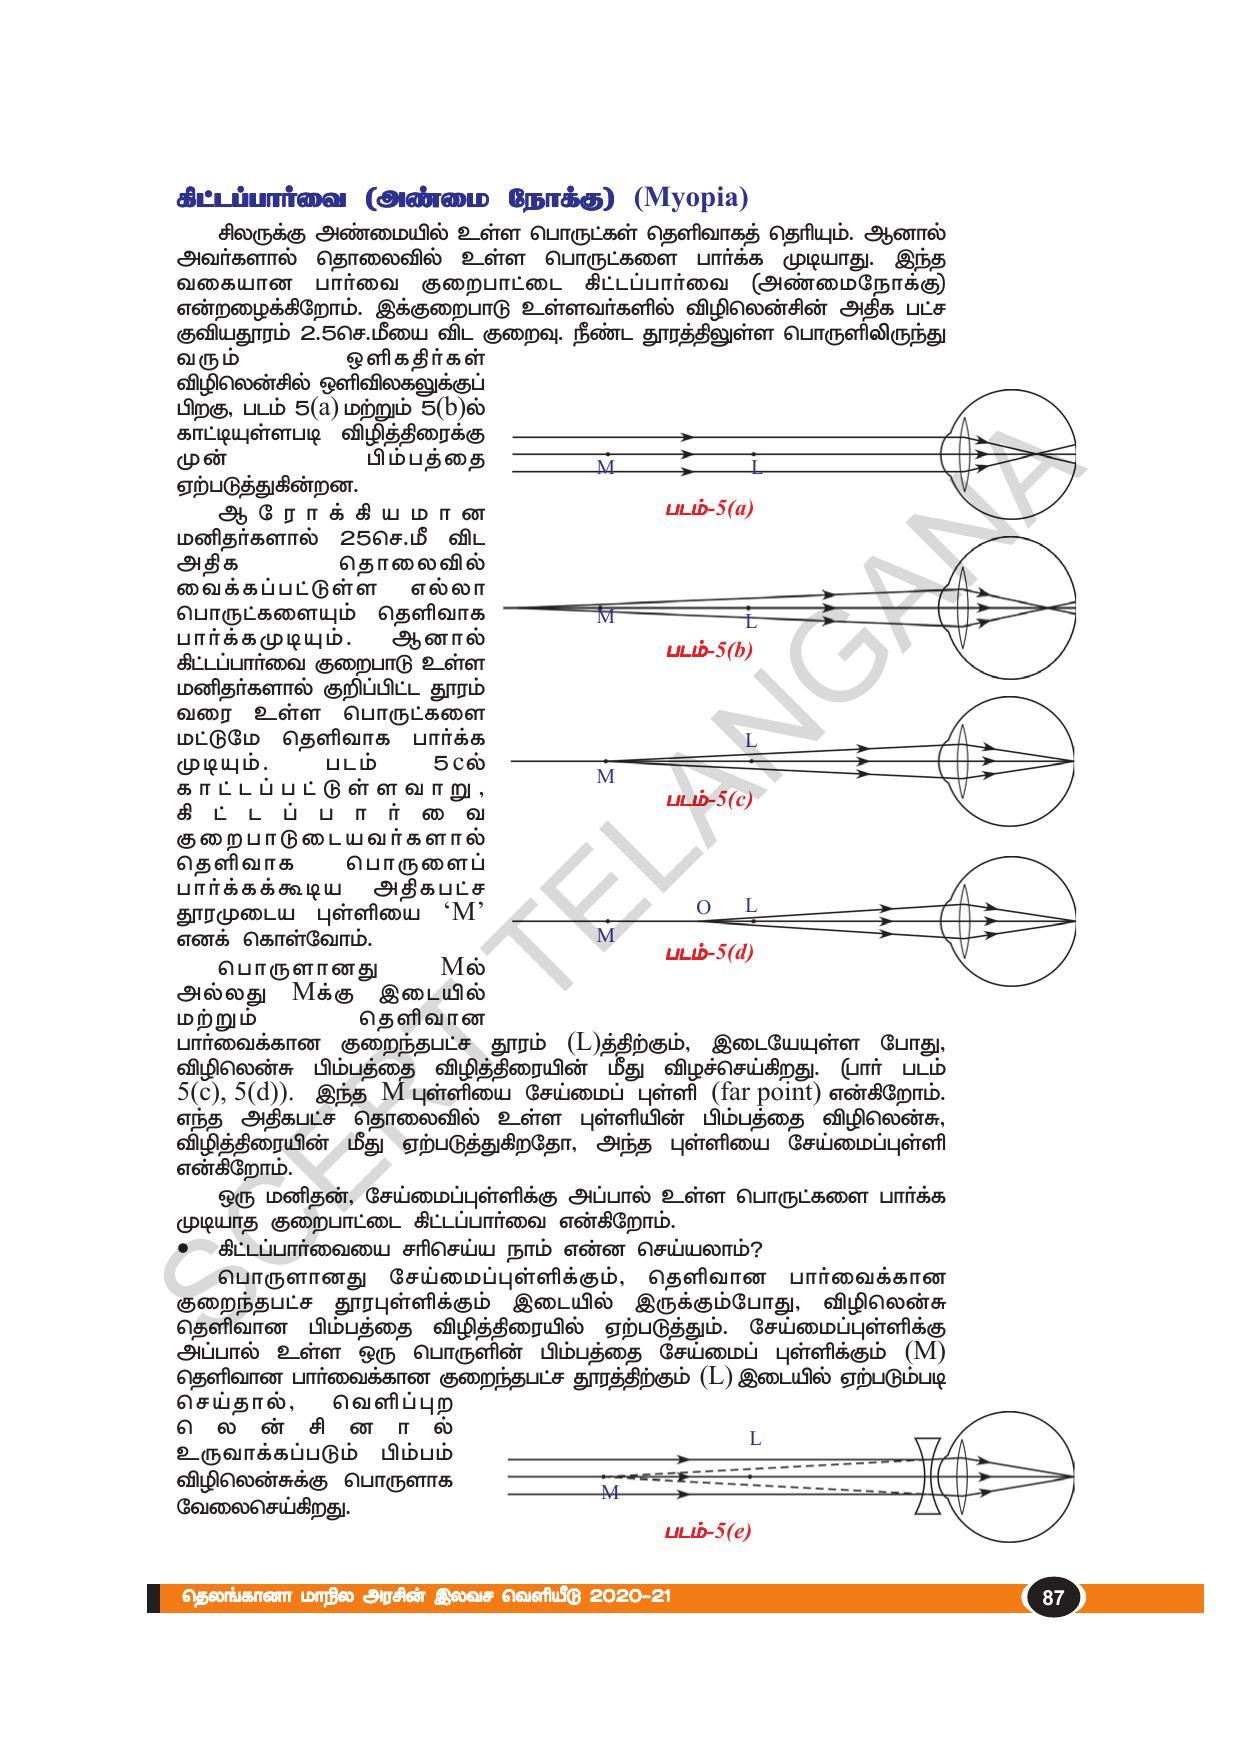 TS SCERT Class 10 Physical Science(Tamil Medium) Text Book - Page 99